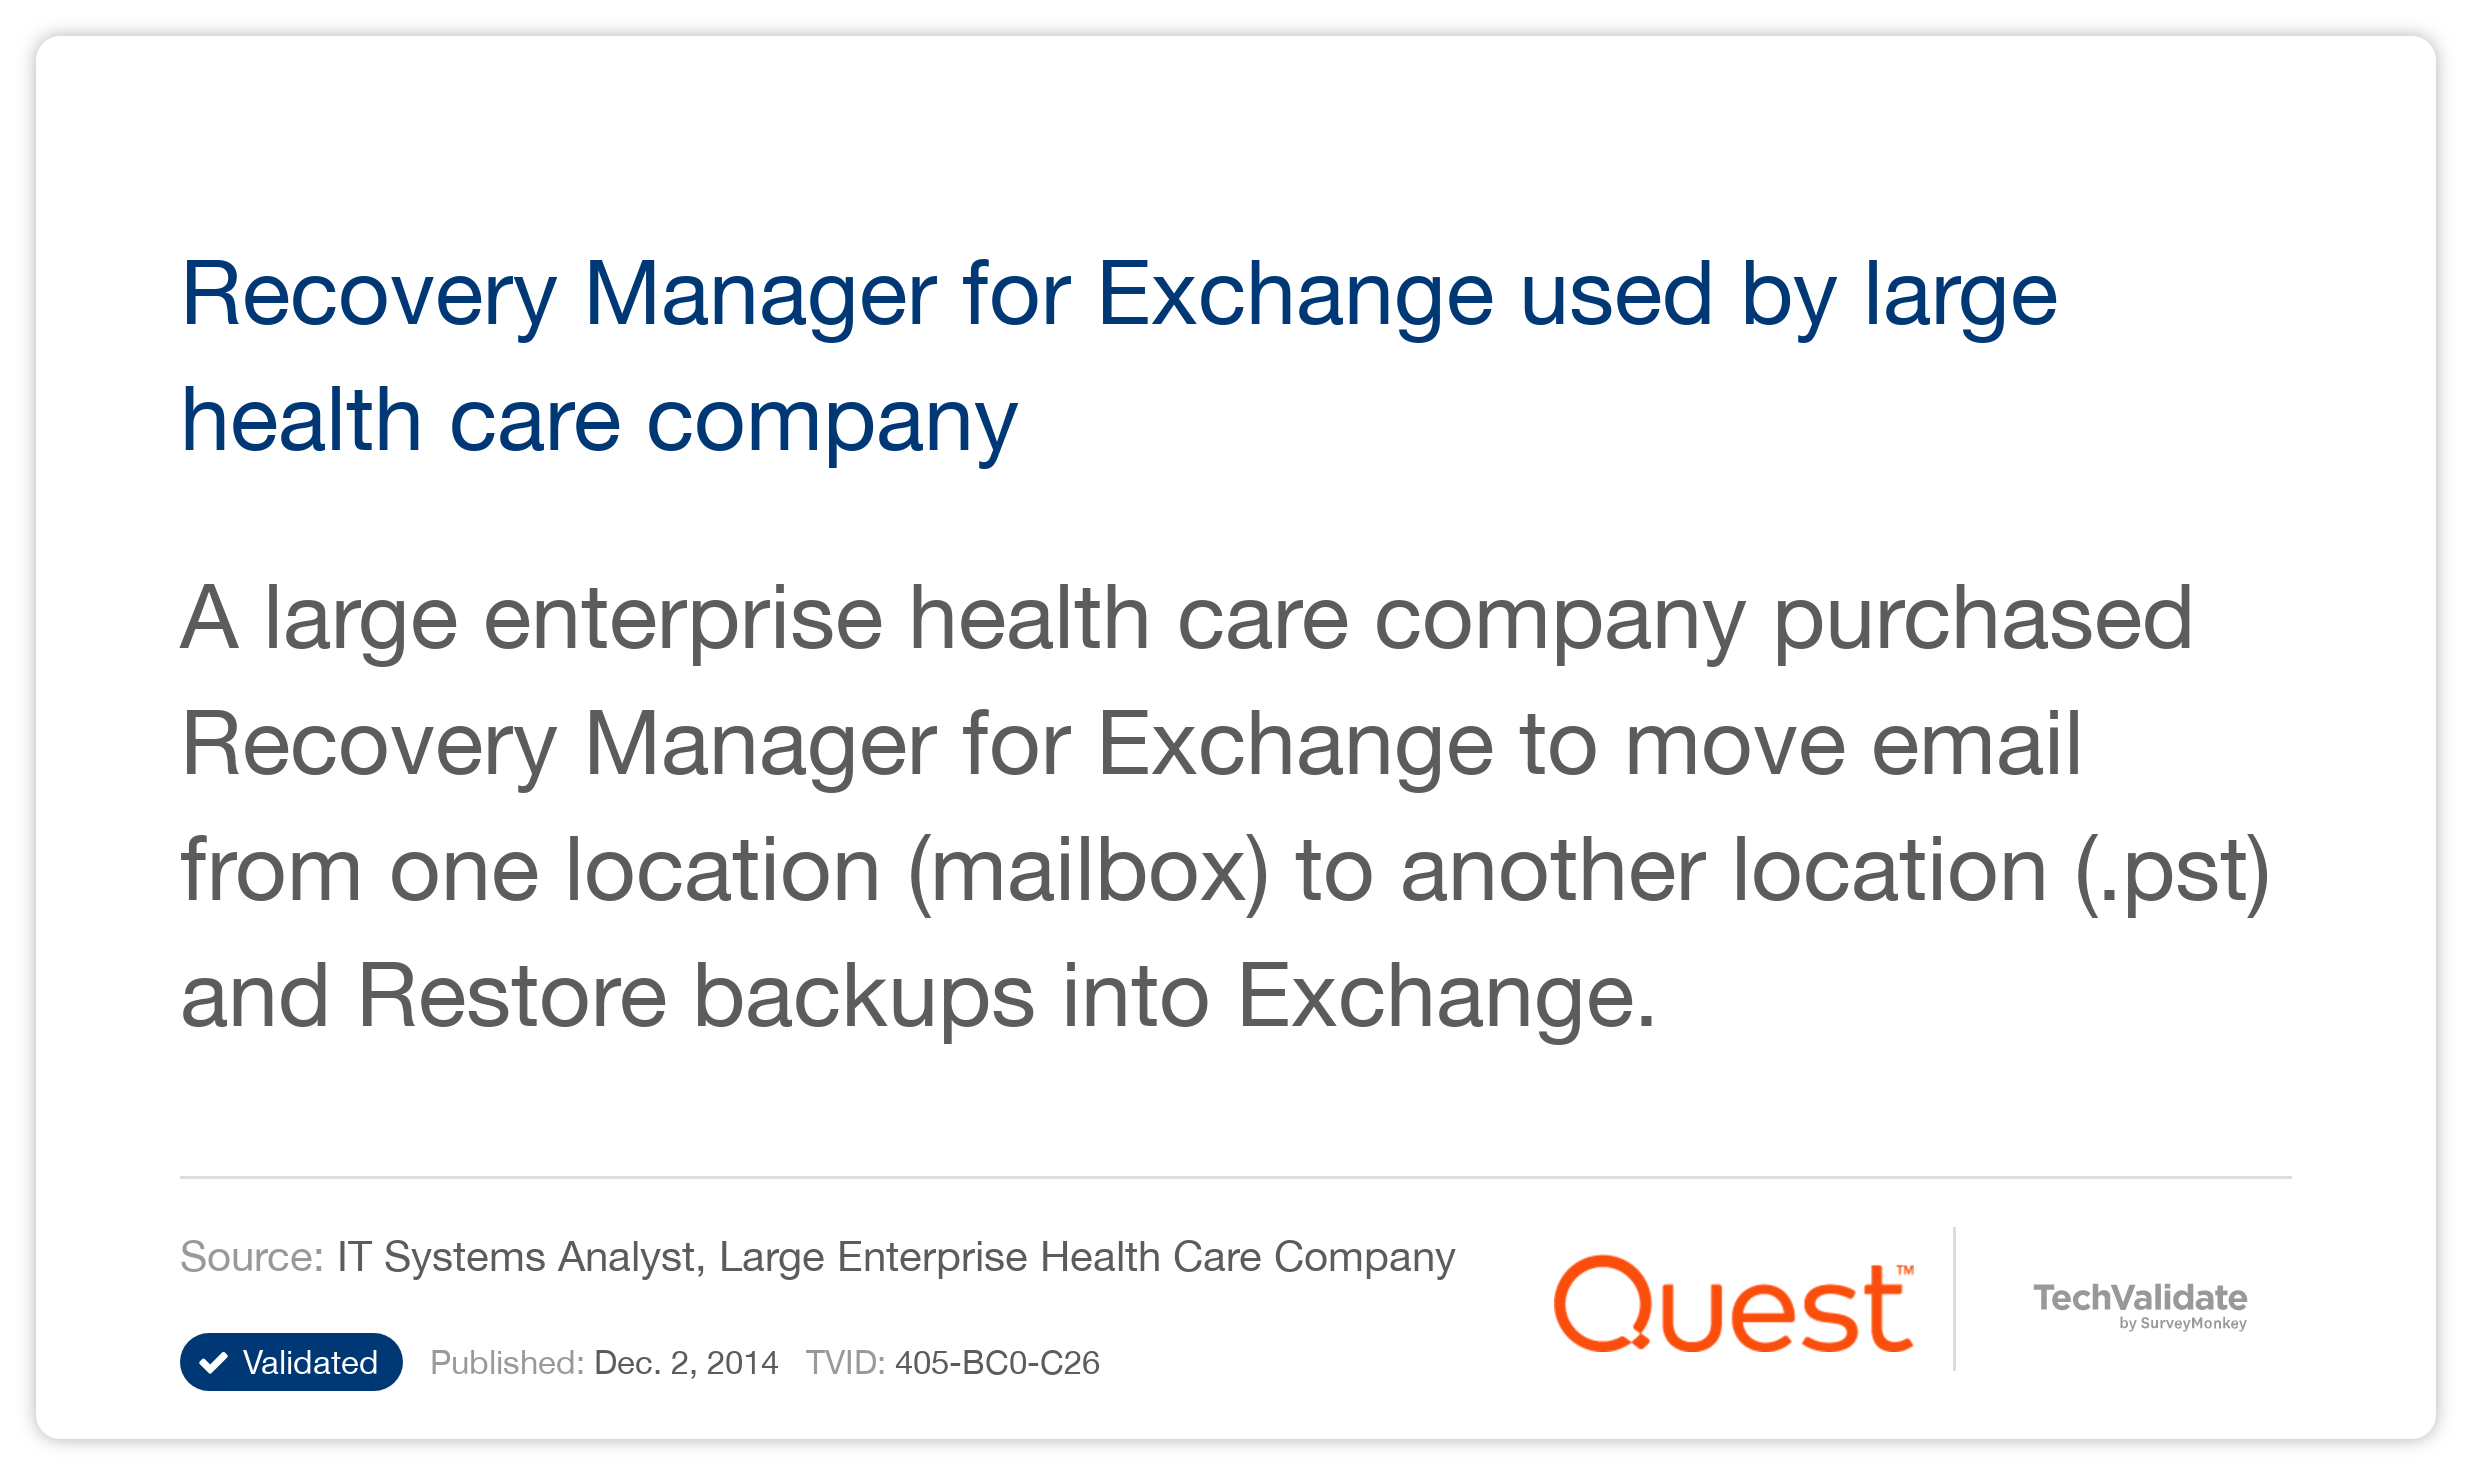 Recovery Manager for Exchange used by large health care company